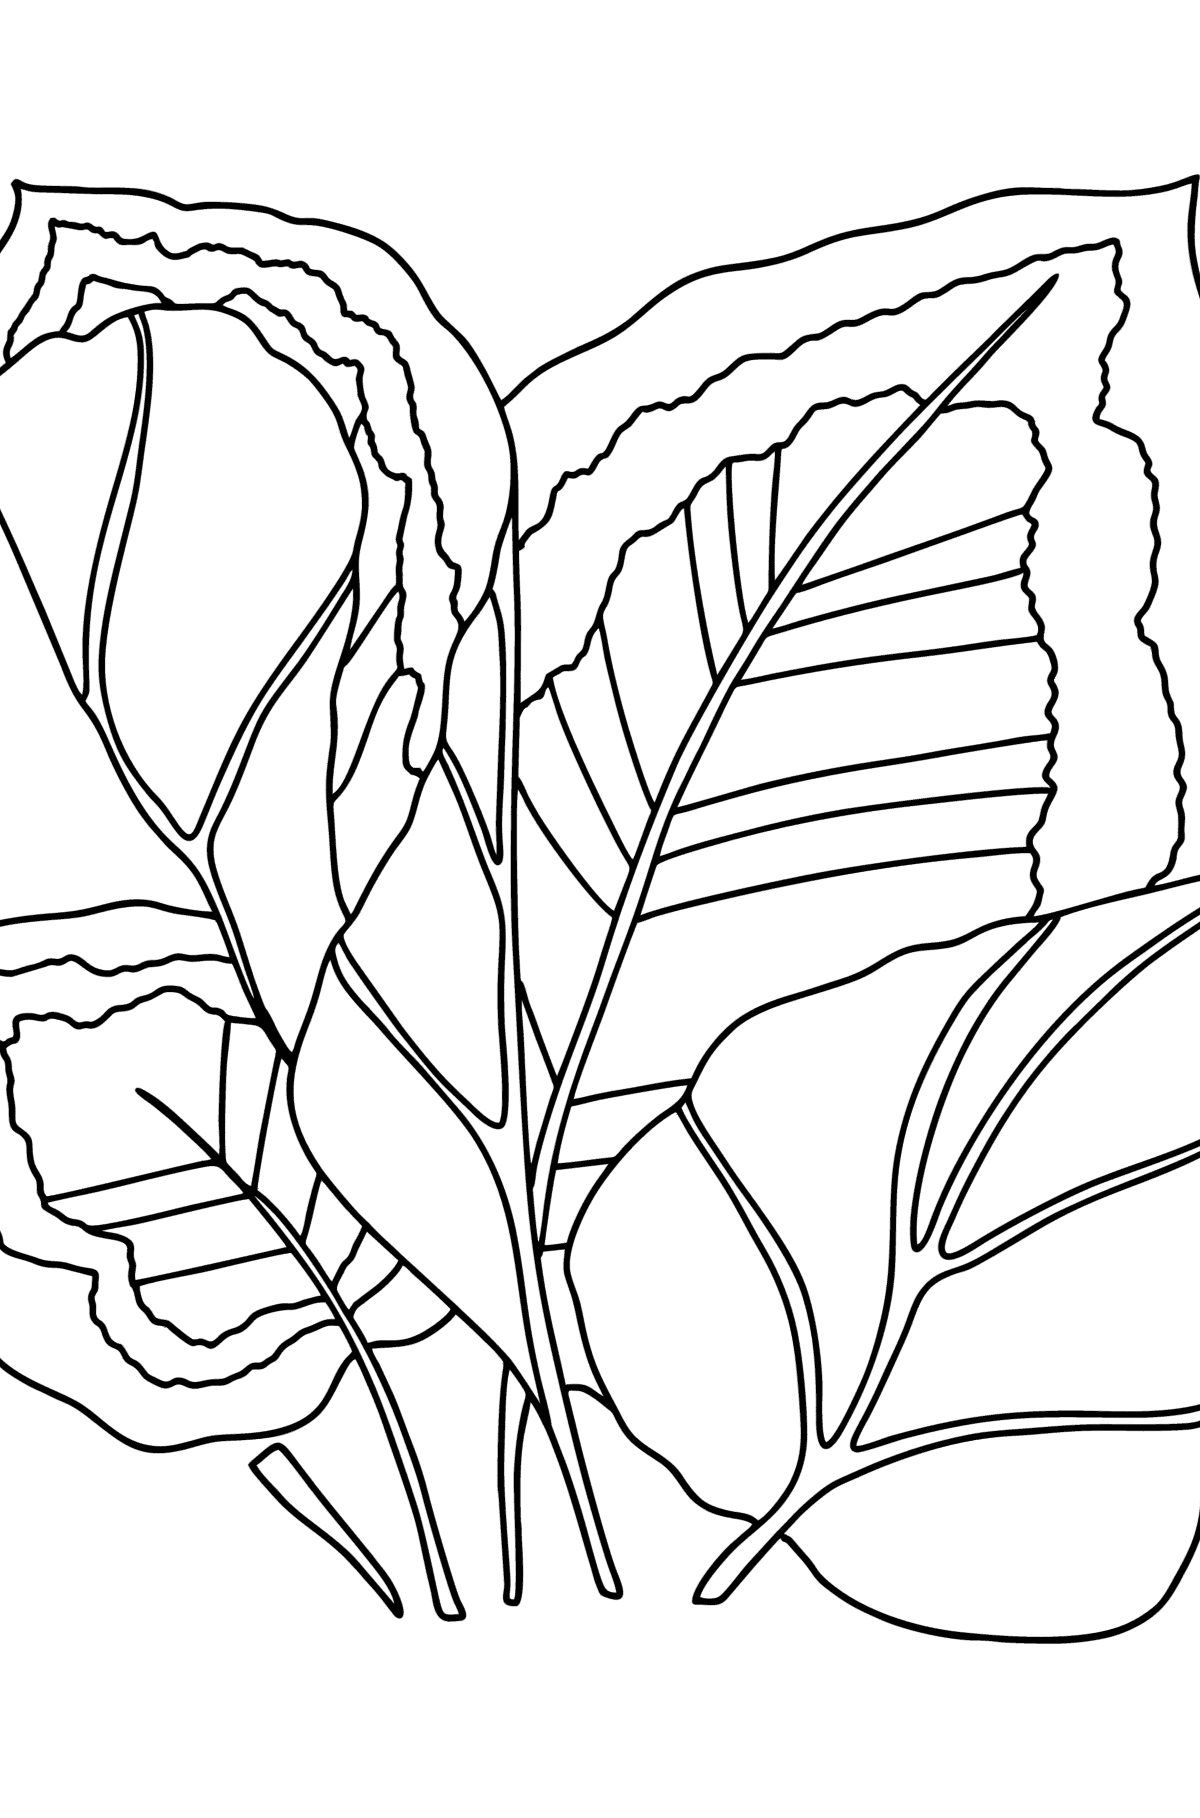 Arrowroot coloring page - Coloring Pages for Kids